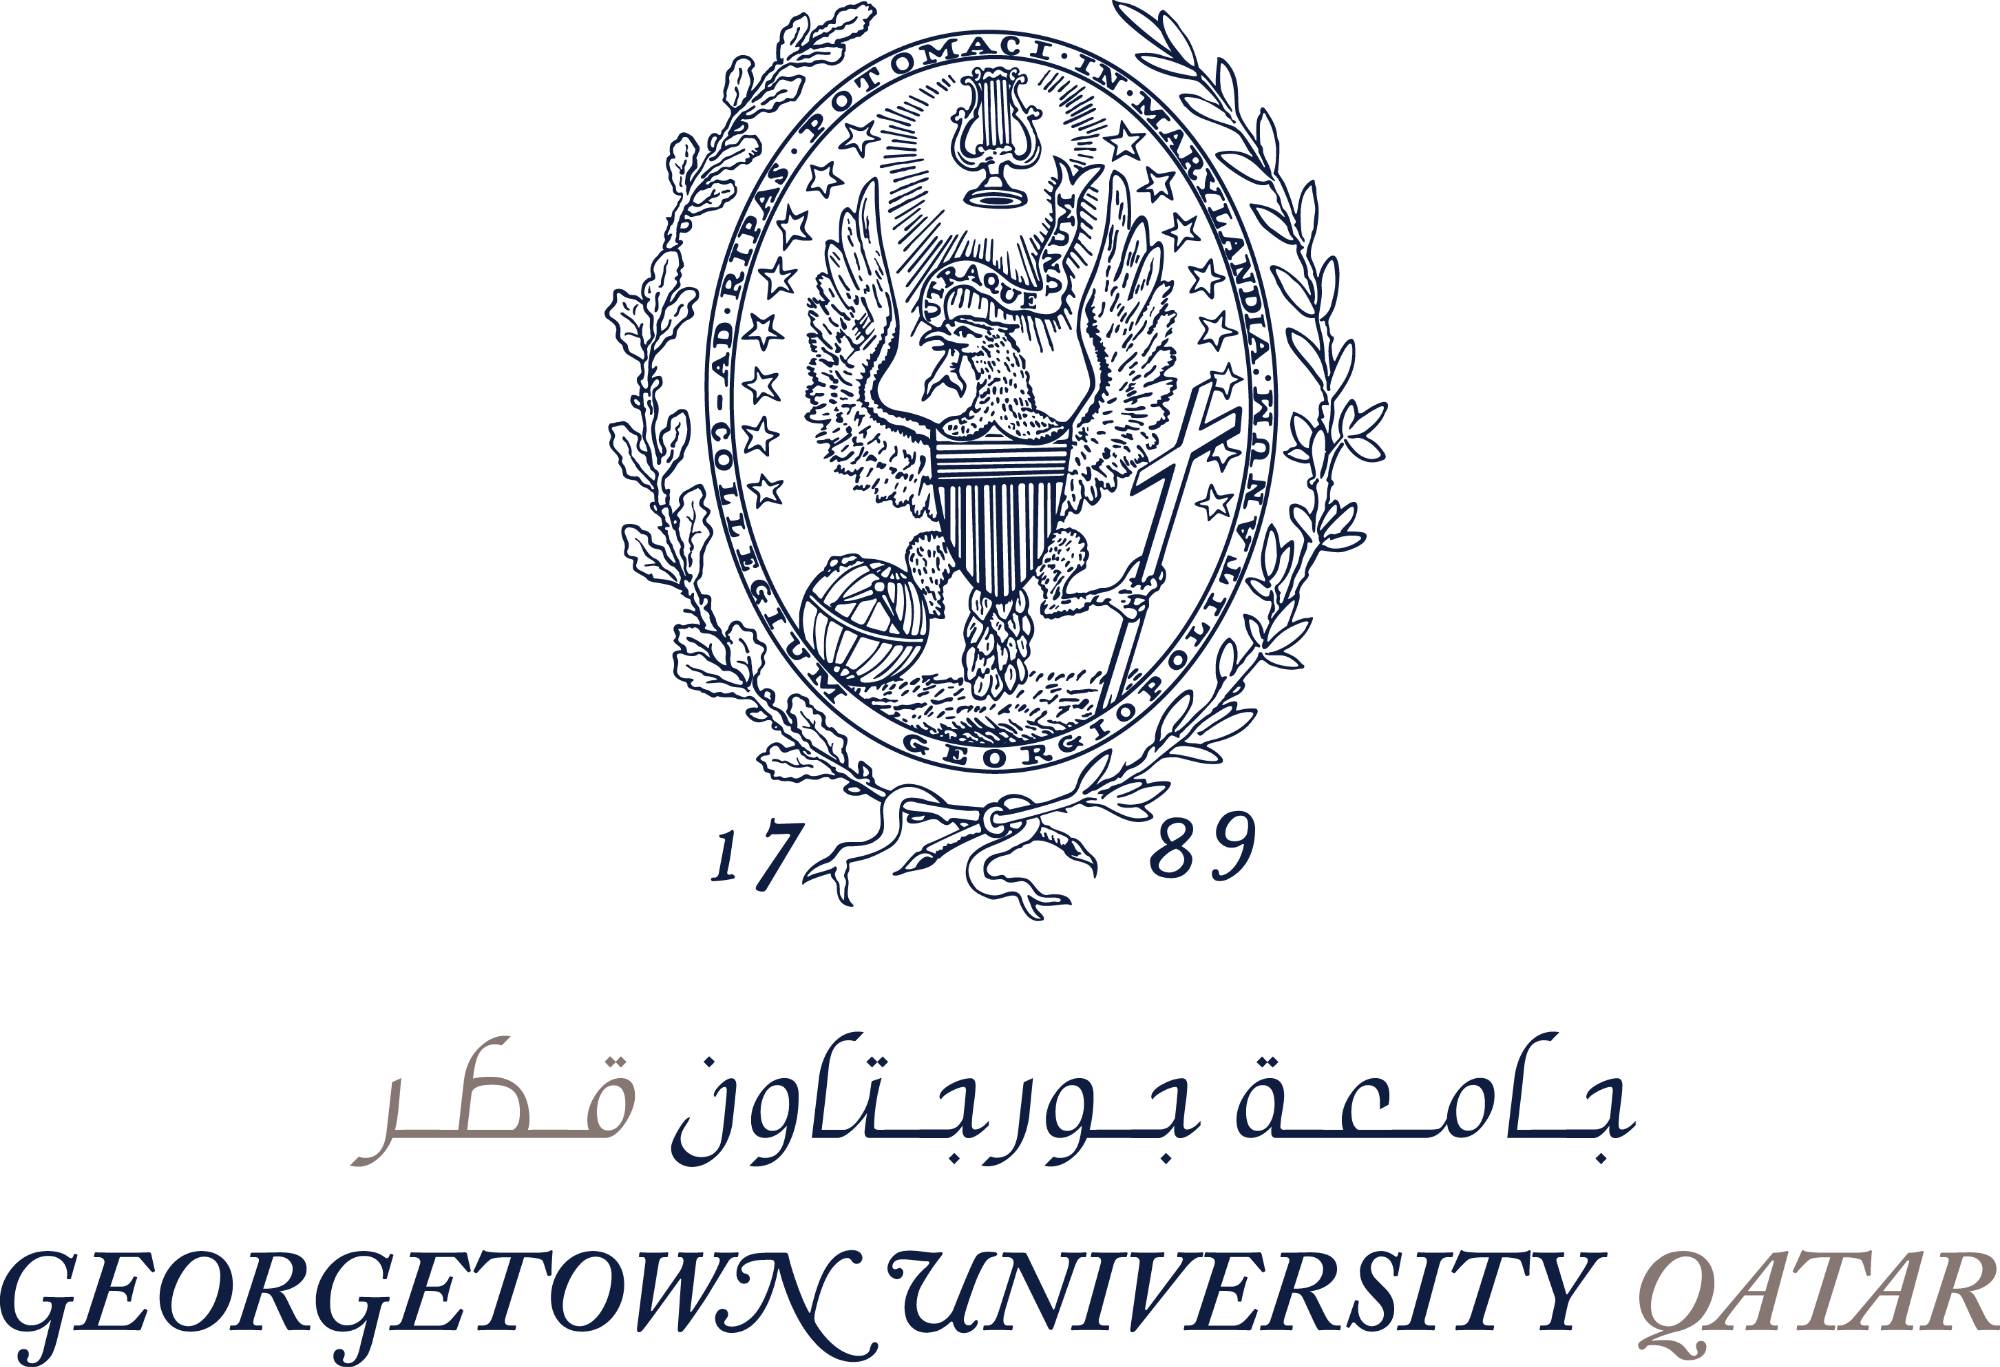 The Georgetown University at Qatar logo features an American Eagle holding a globe in its right claw, a Christian crucifix in its left claw, a Lyre above it, 16 stars representing the states that existed when it was created, An inscription which reads: "Collegium Georgiopolitanum Ad Ripas Potomaci In Marylandia translates to &#8220;Georgetown College on the banks of the Potomac in Maryland.&#8221; And the words "Utraque Unum"  which loosely translates to &#8220;from several parts into one,&#8221; suggests the harmony that can exist between science and religion.